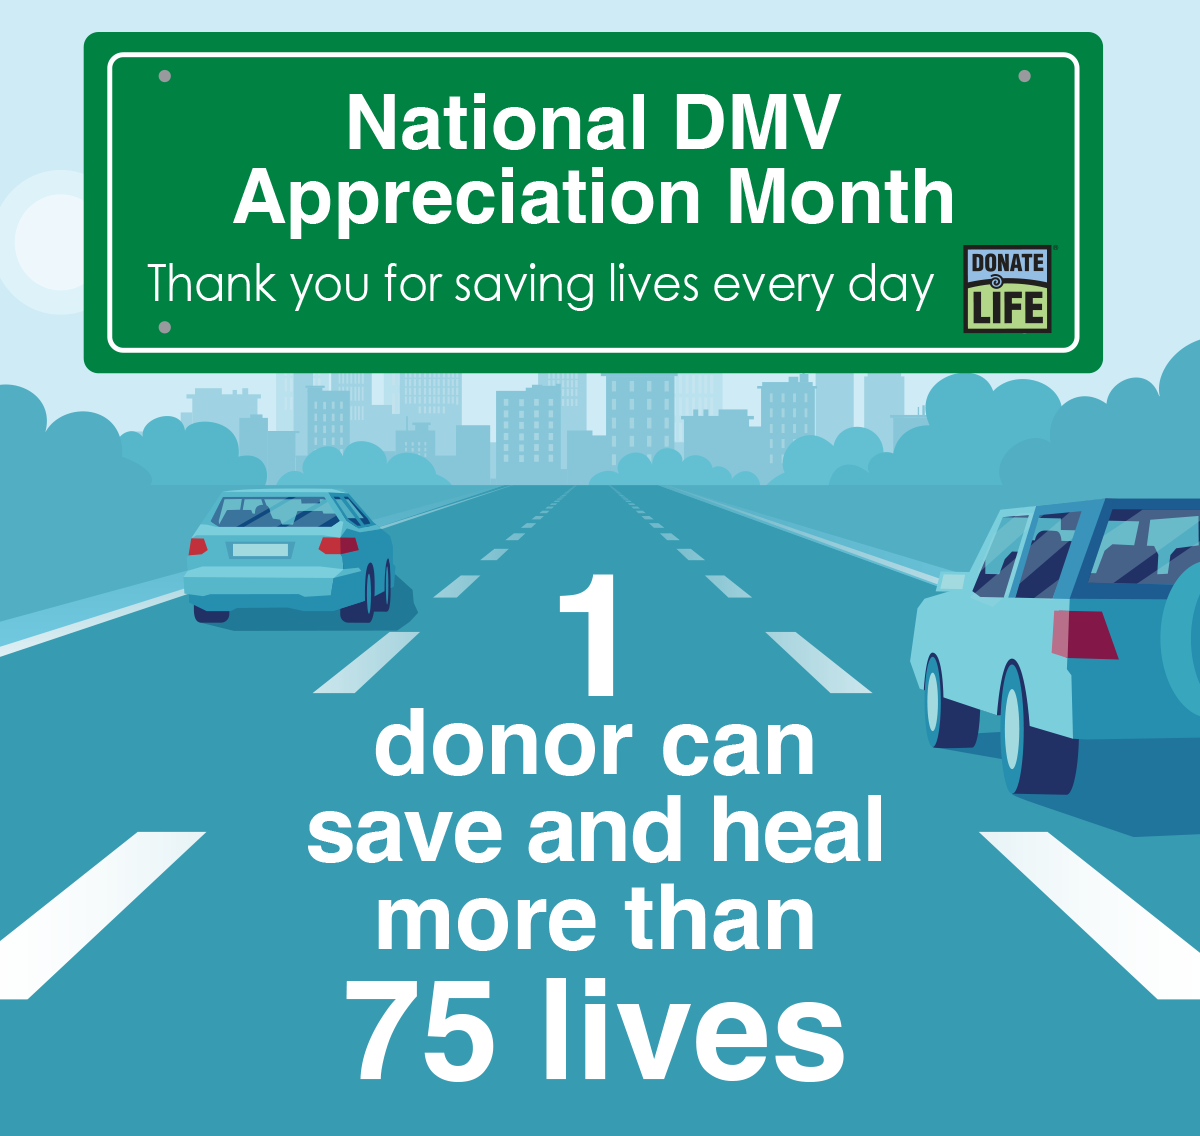 image of two cars driving on highway towards city scape of buildings with green street sign that reads national dmv appreciation month thank you for saving lives every day with donate life logo 1 donor can save and heal more than 75 lives